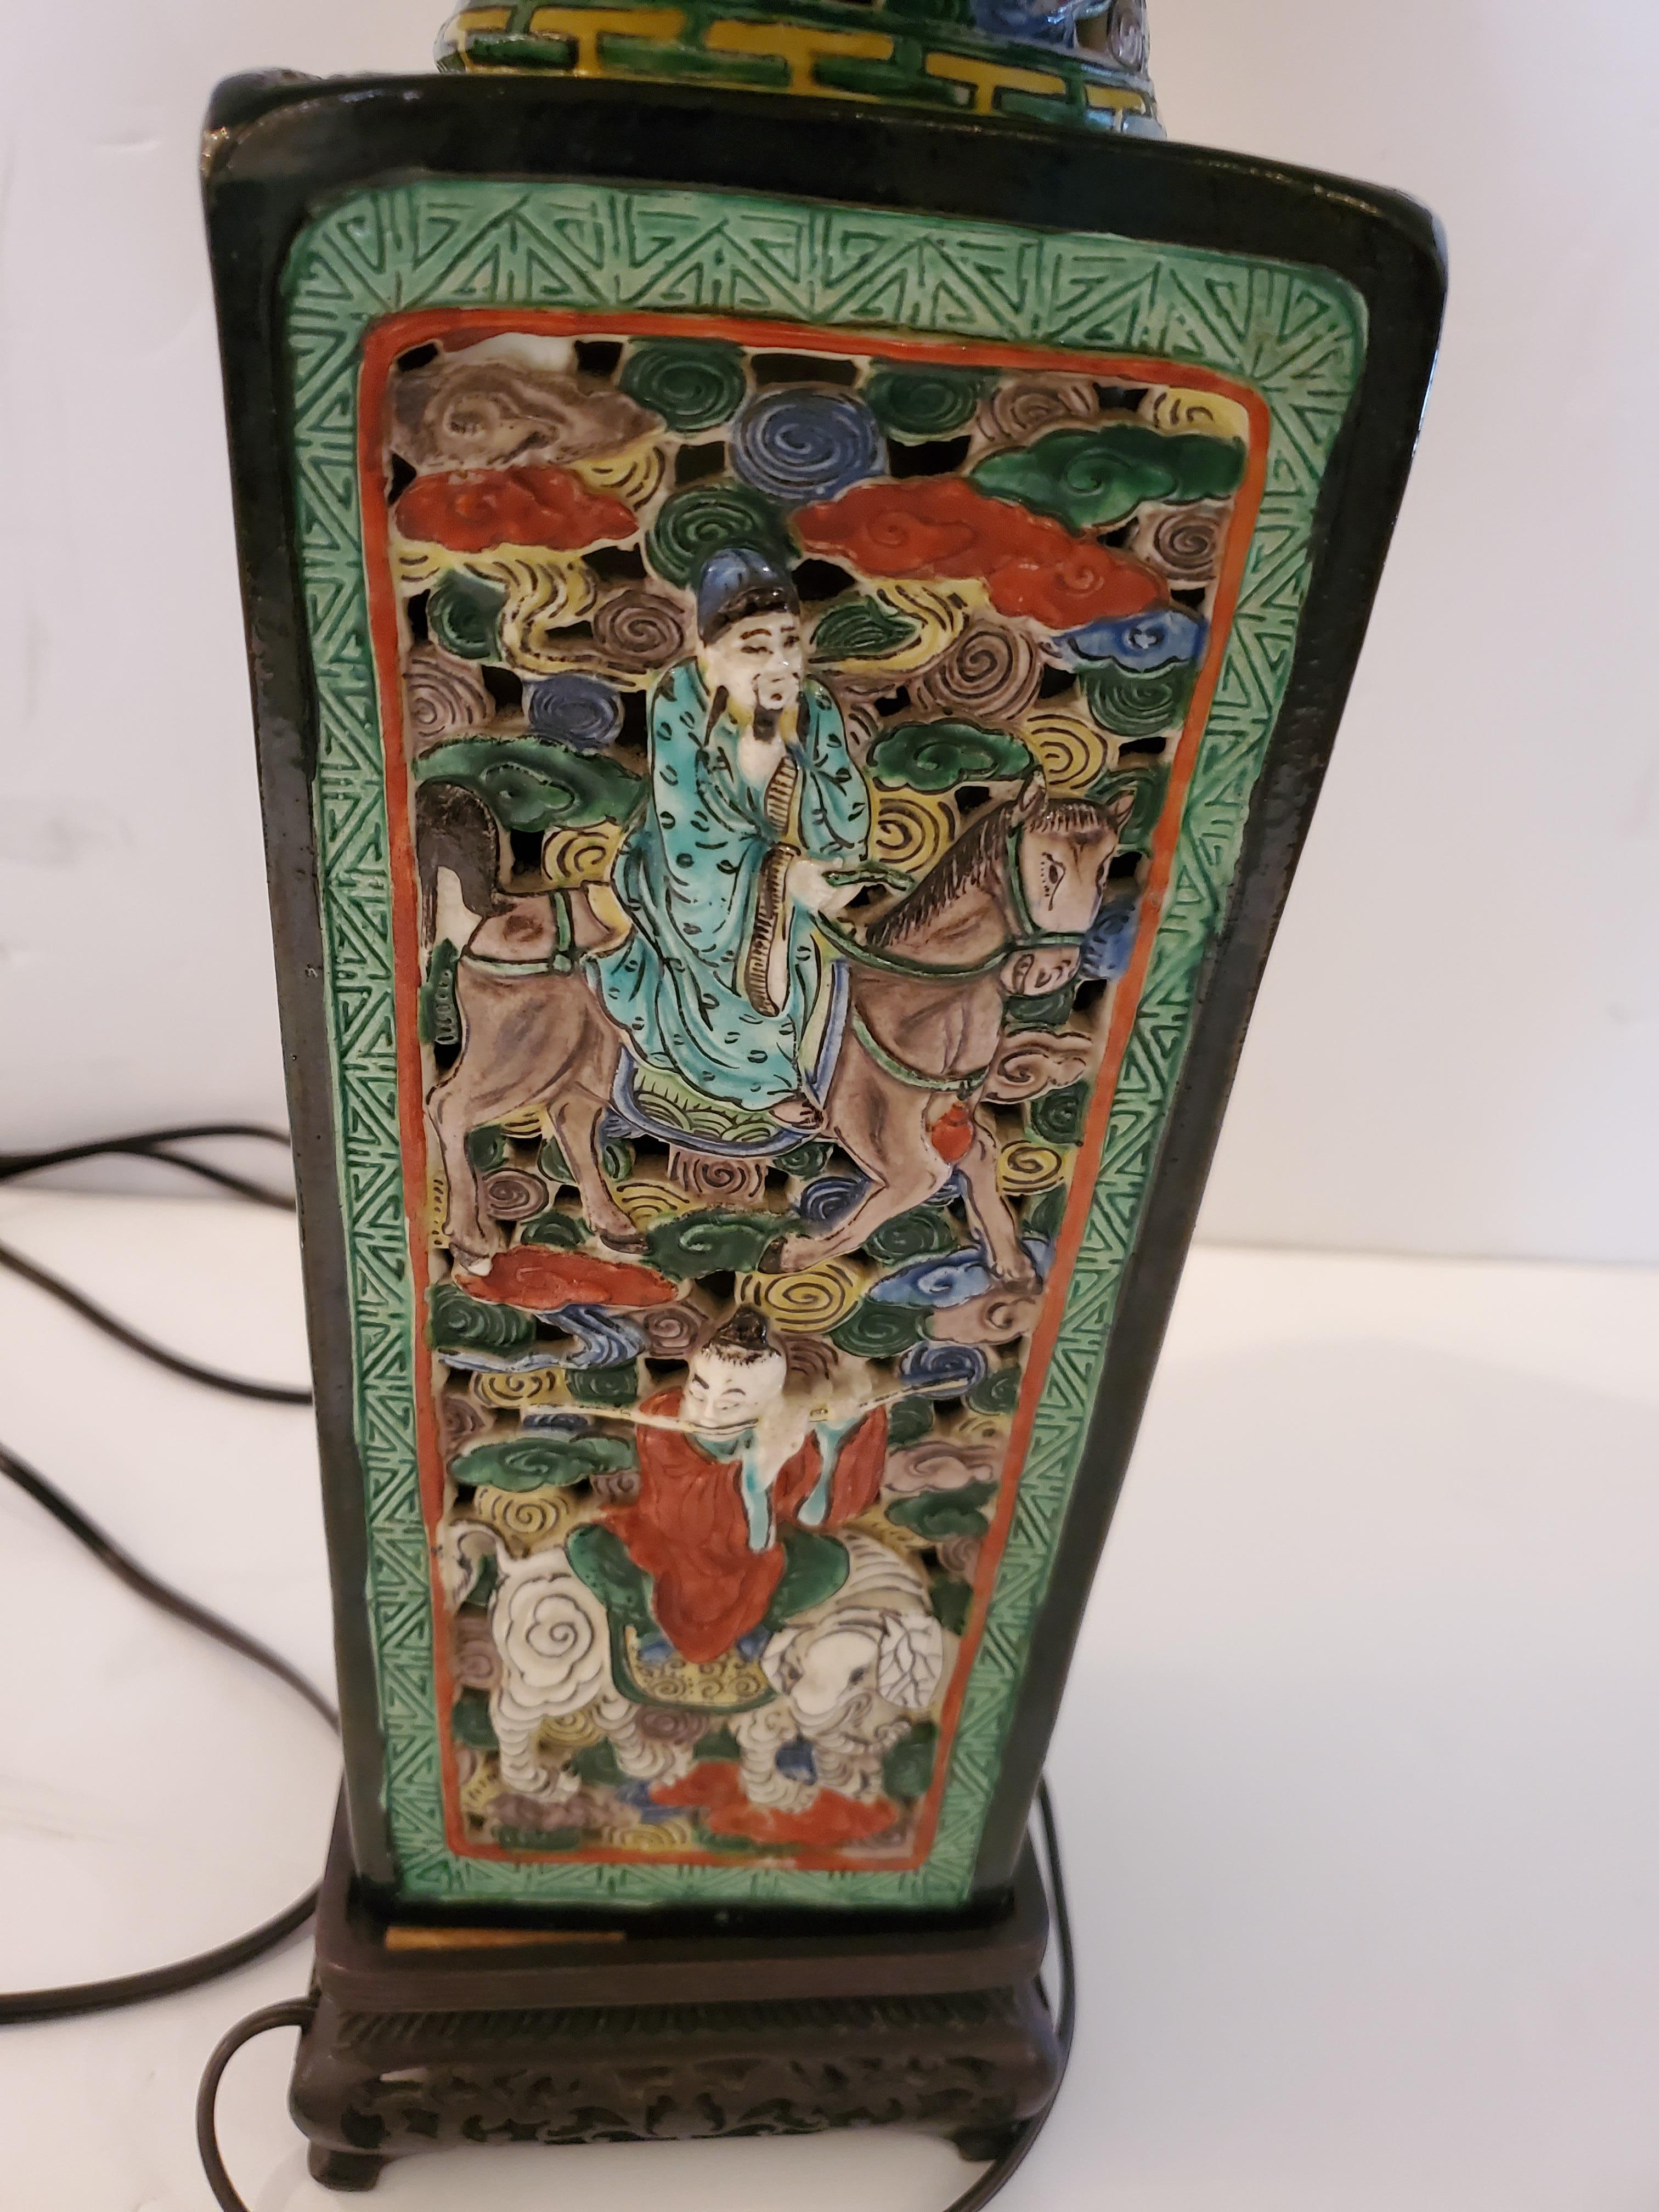 A rare vintage Asian table lamp having impressively detailed ceramic base decorated with figures and dense background in red, green, blue and black. Original silk black shade is included.
Base 5